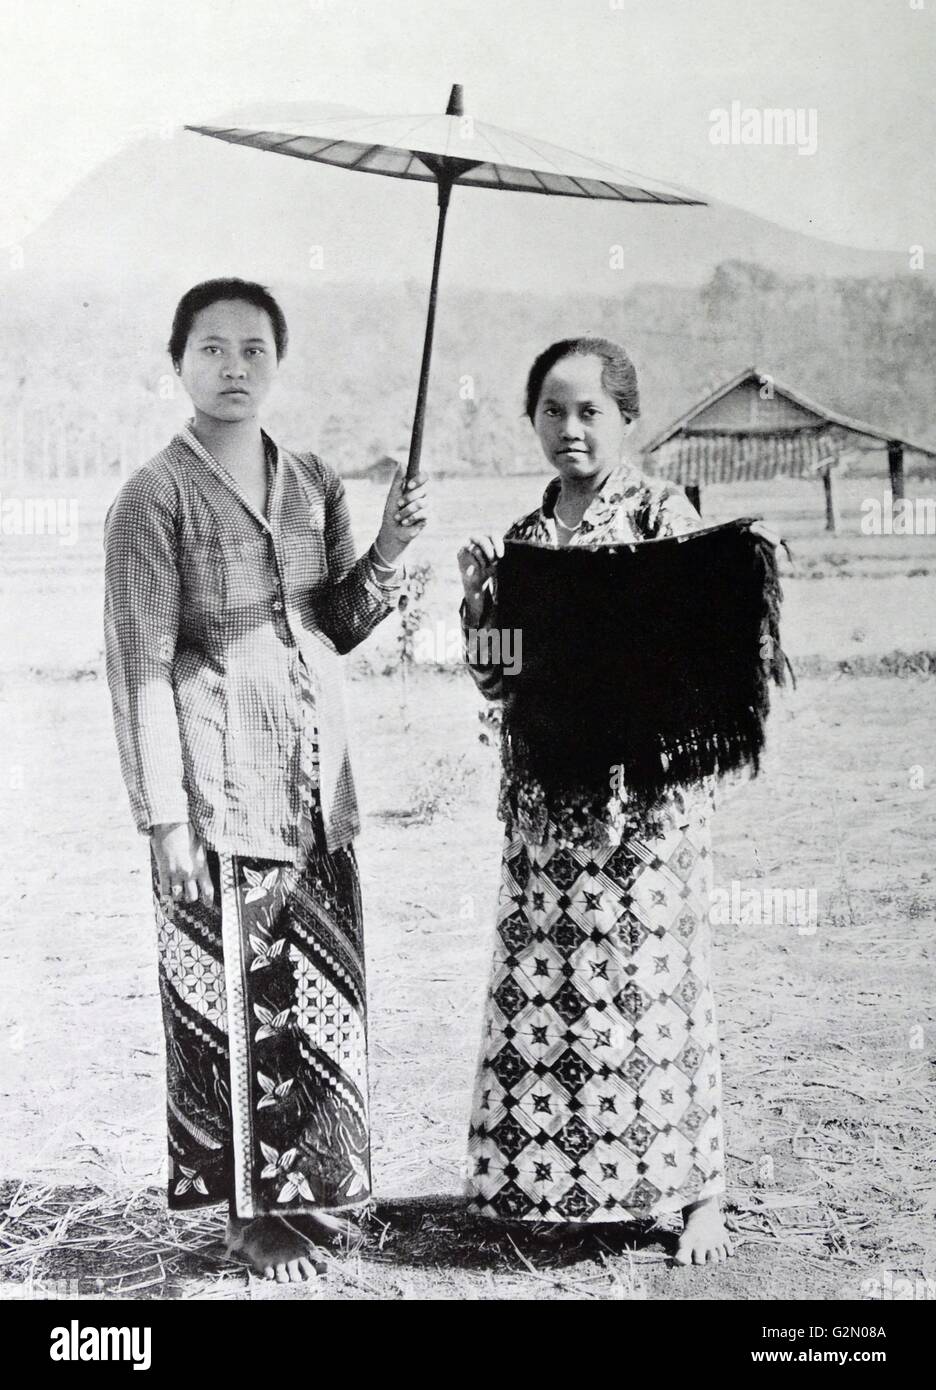 Photograph shows two female figures, one is a Caine business women, the other holds an umbrella to shade them from the sun. Dutch East Indies, known as modern Indonesia. Dated c1935. Stock Photo